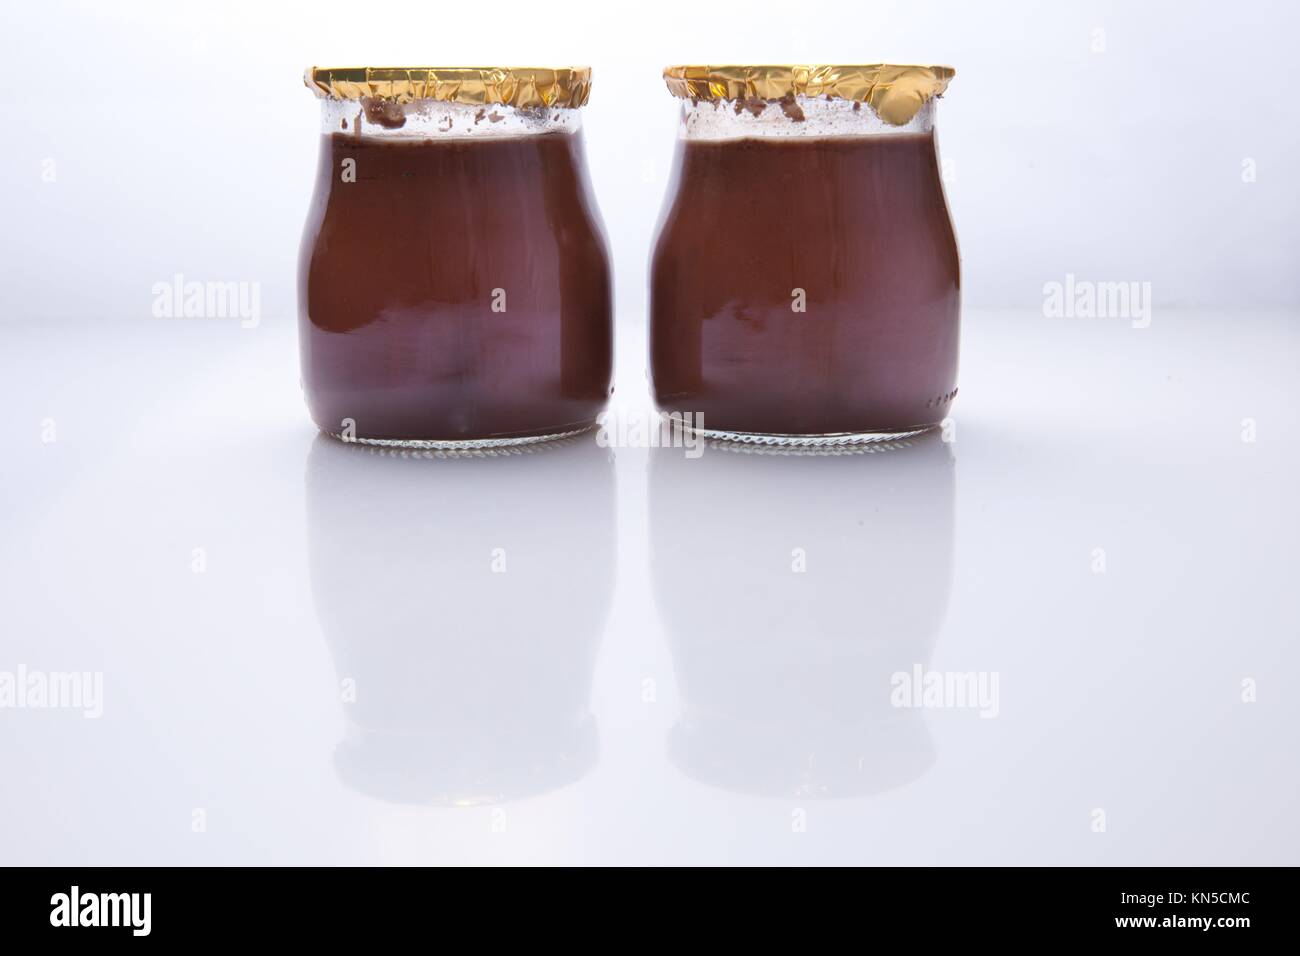 Chocolate truffle glass vessels with golden cap over white background. Stock Photo